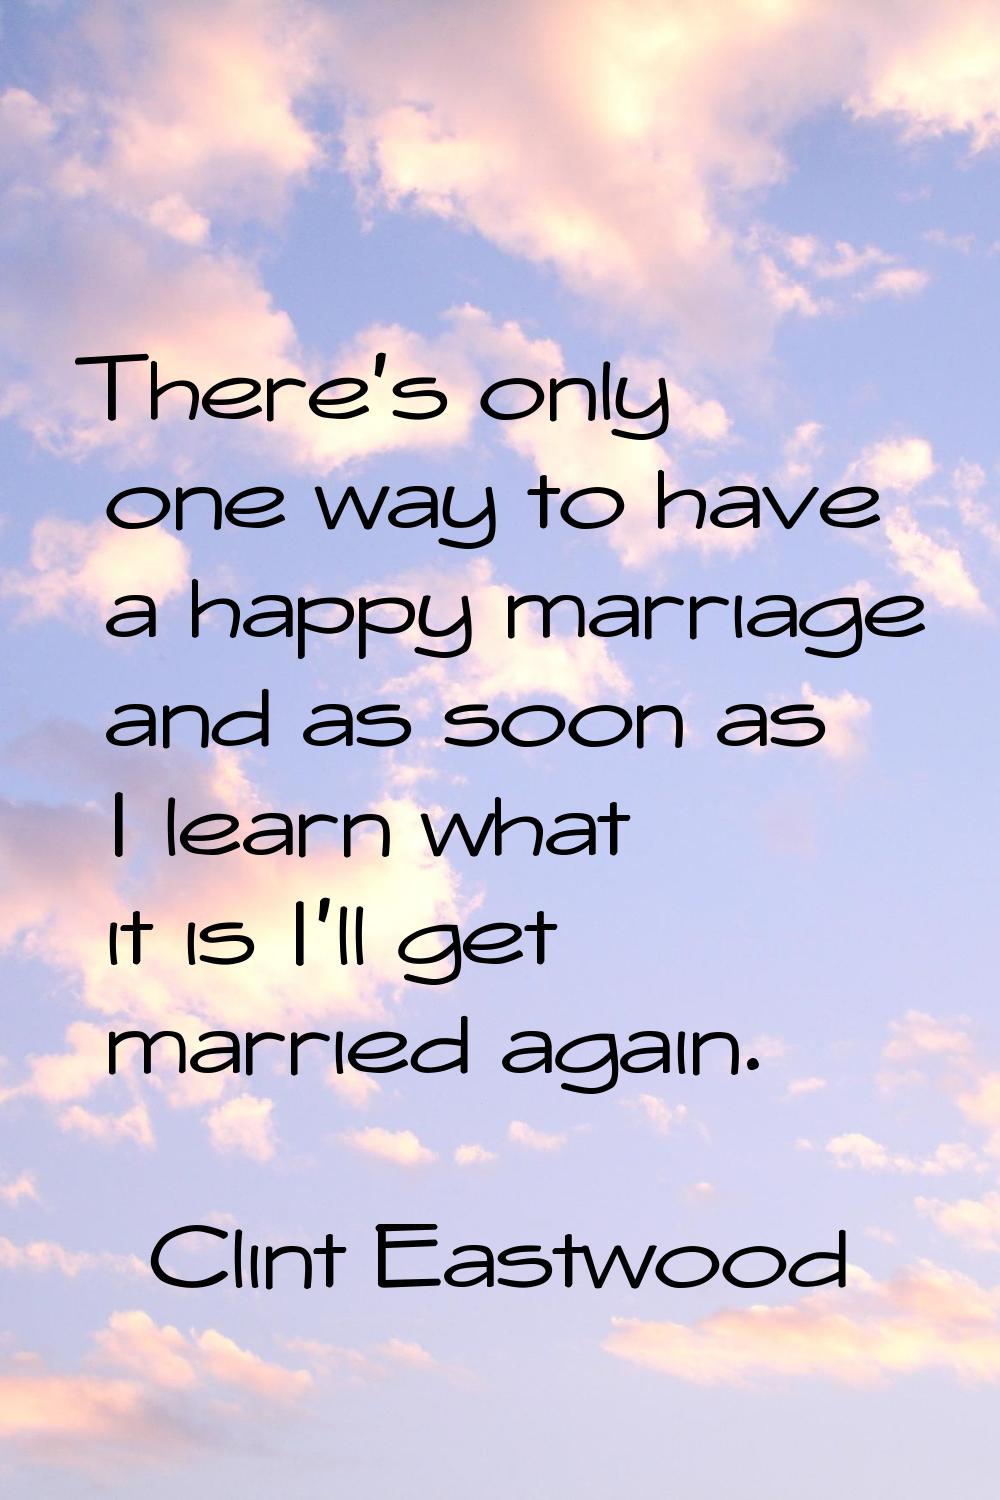 There's only one way to have a happy marriage and as soon as I learn what it is I'll get married ag